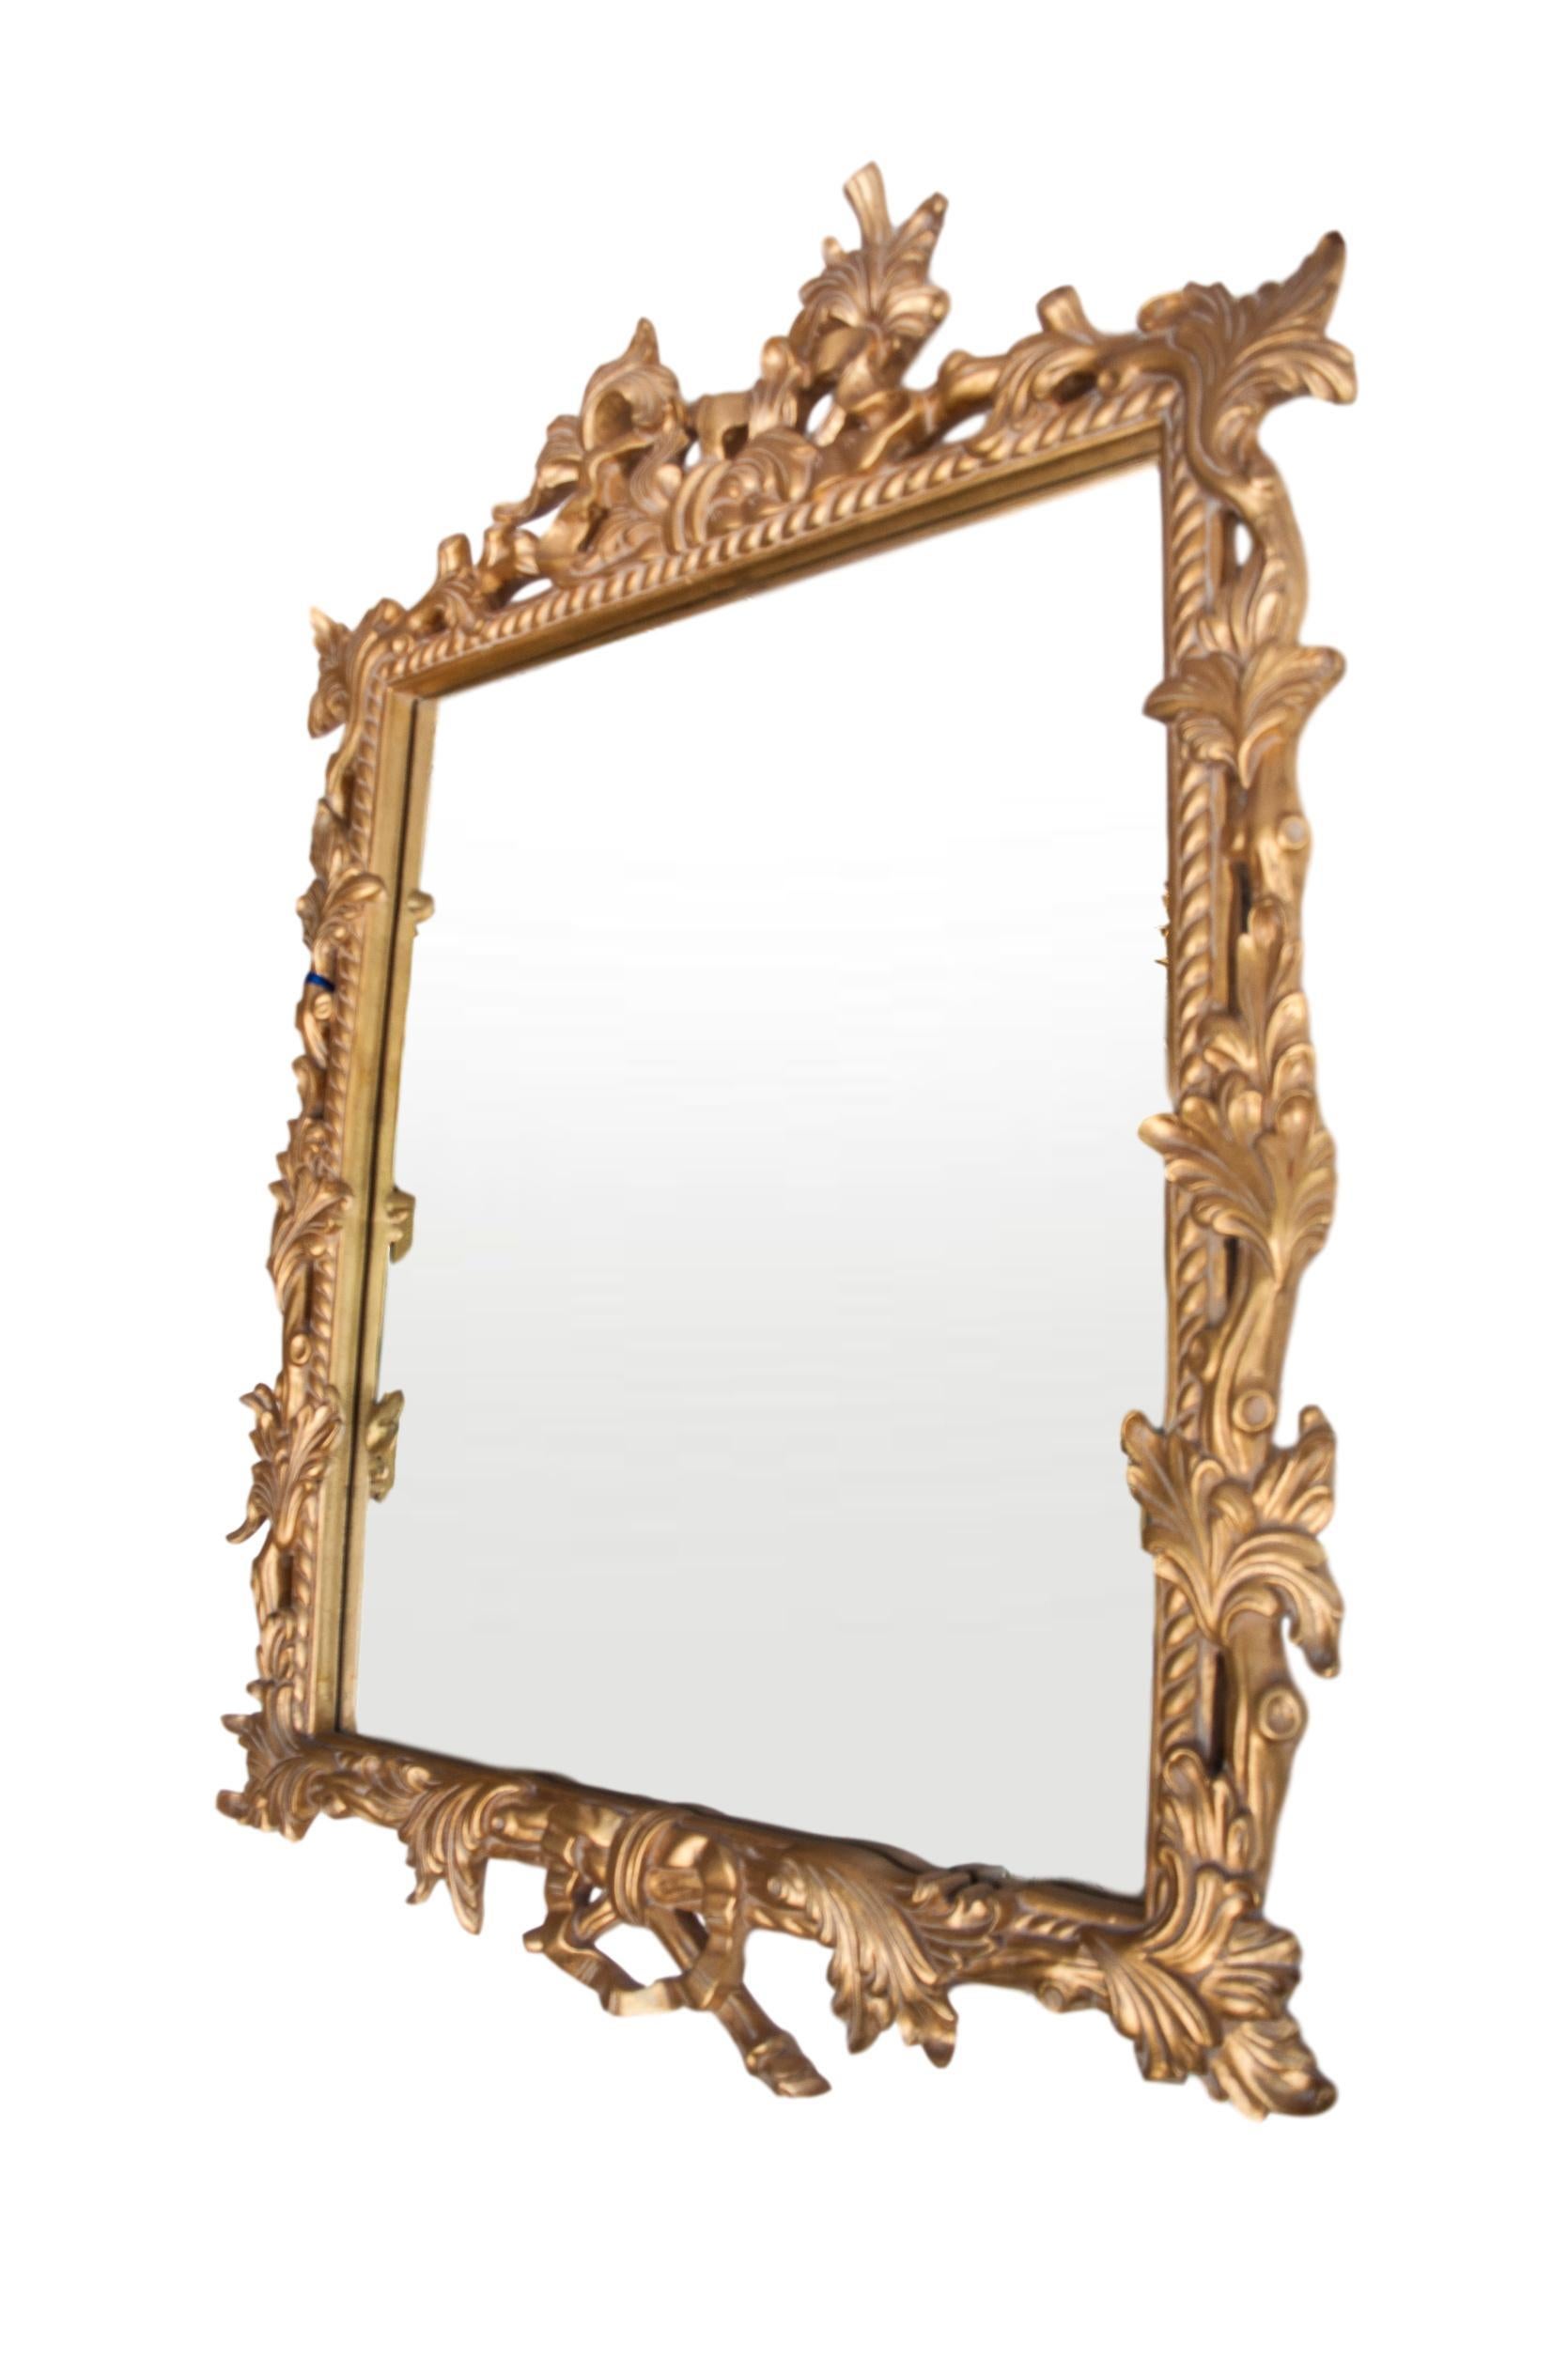 Hand carved and gilded mirror, made in England. This is the highest quality mirror, made to the highest standards of Old Europe, it is gessoed and hand gold leafed. The naturalistic open vine, leaves and free form carving offer an unexpected